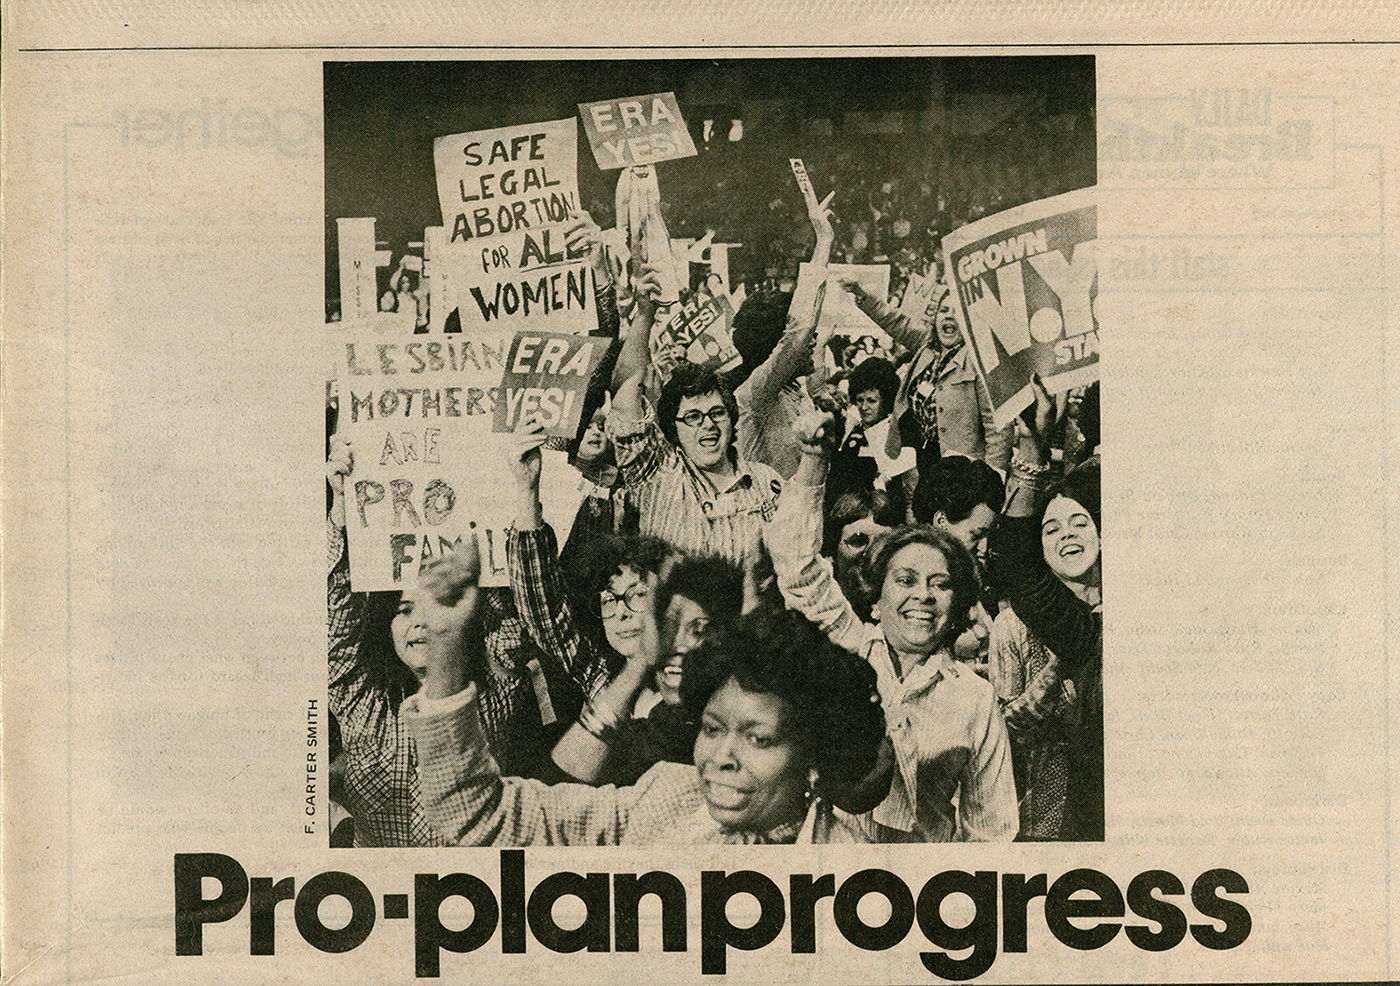 Newspaper headline from the National Women's Conference. Conference attendees advocate for various rights with their posters. Courtesy of F. Carter Smith and the University of Houston. Image available on the Internet and included in accordance with Title 17 U.S.C. Section 107.